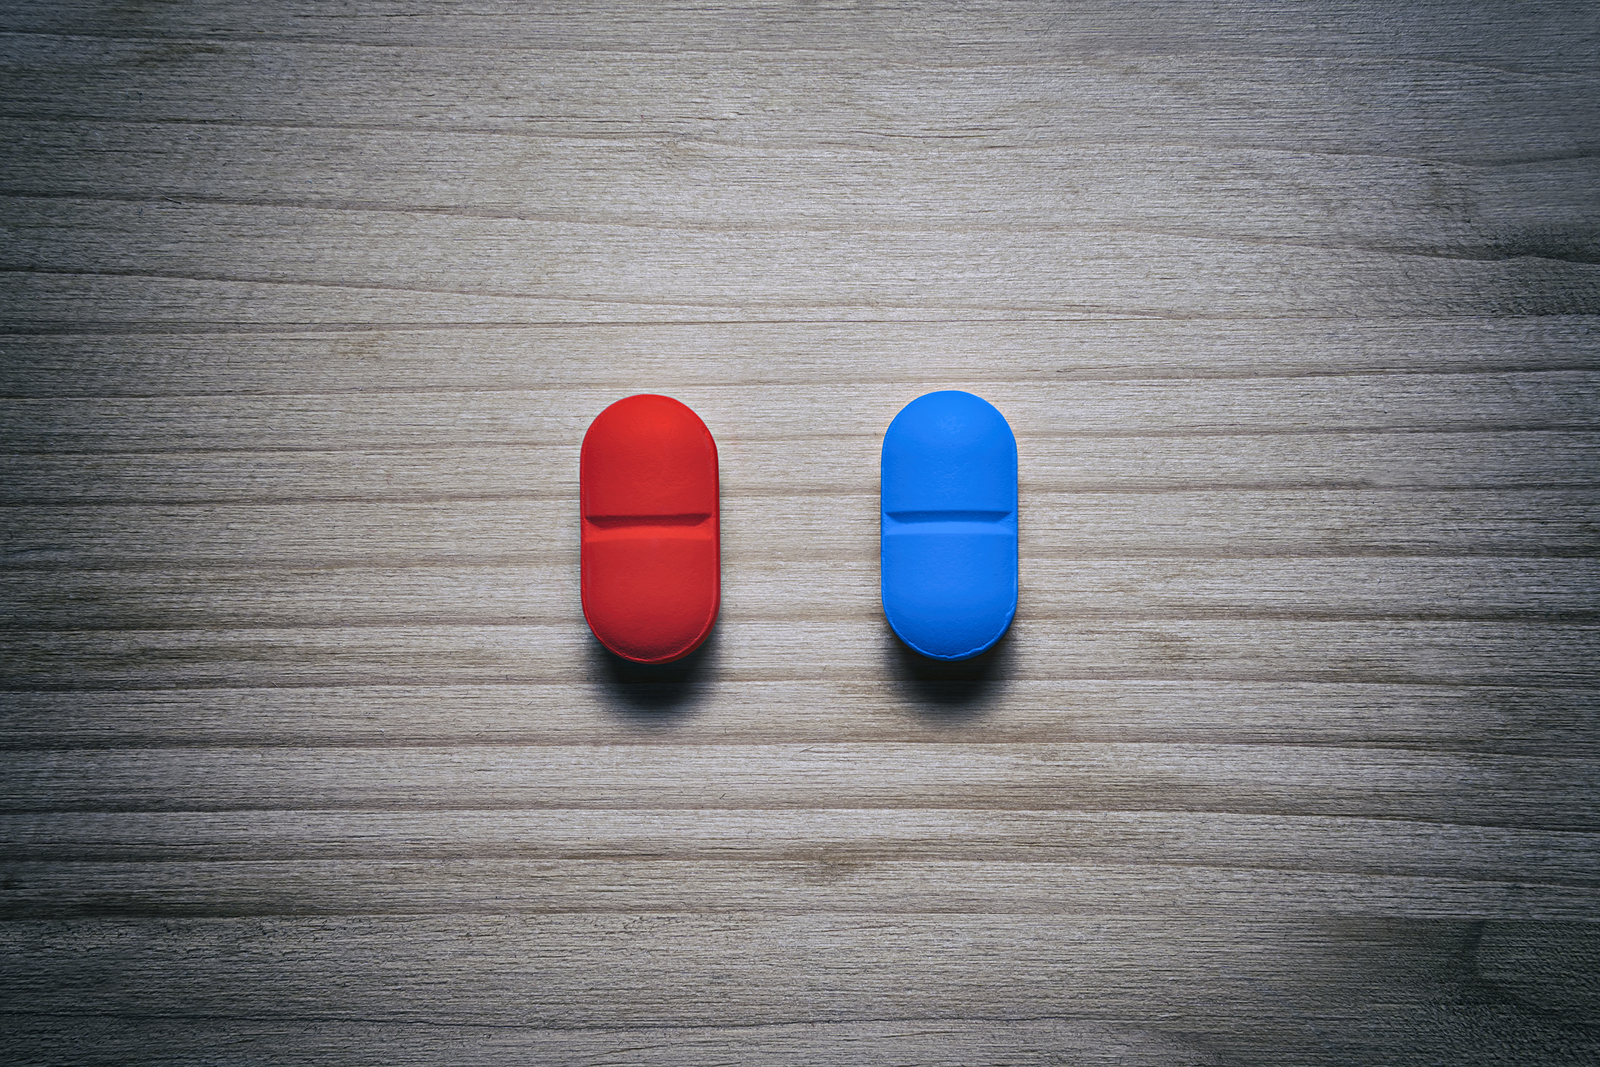 The red pill or the blue - which is it to be? 